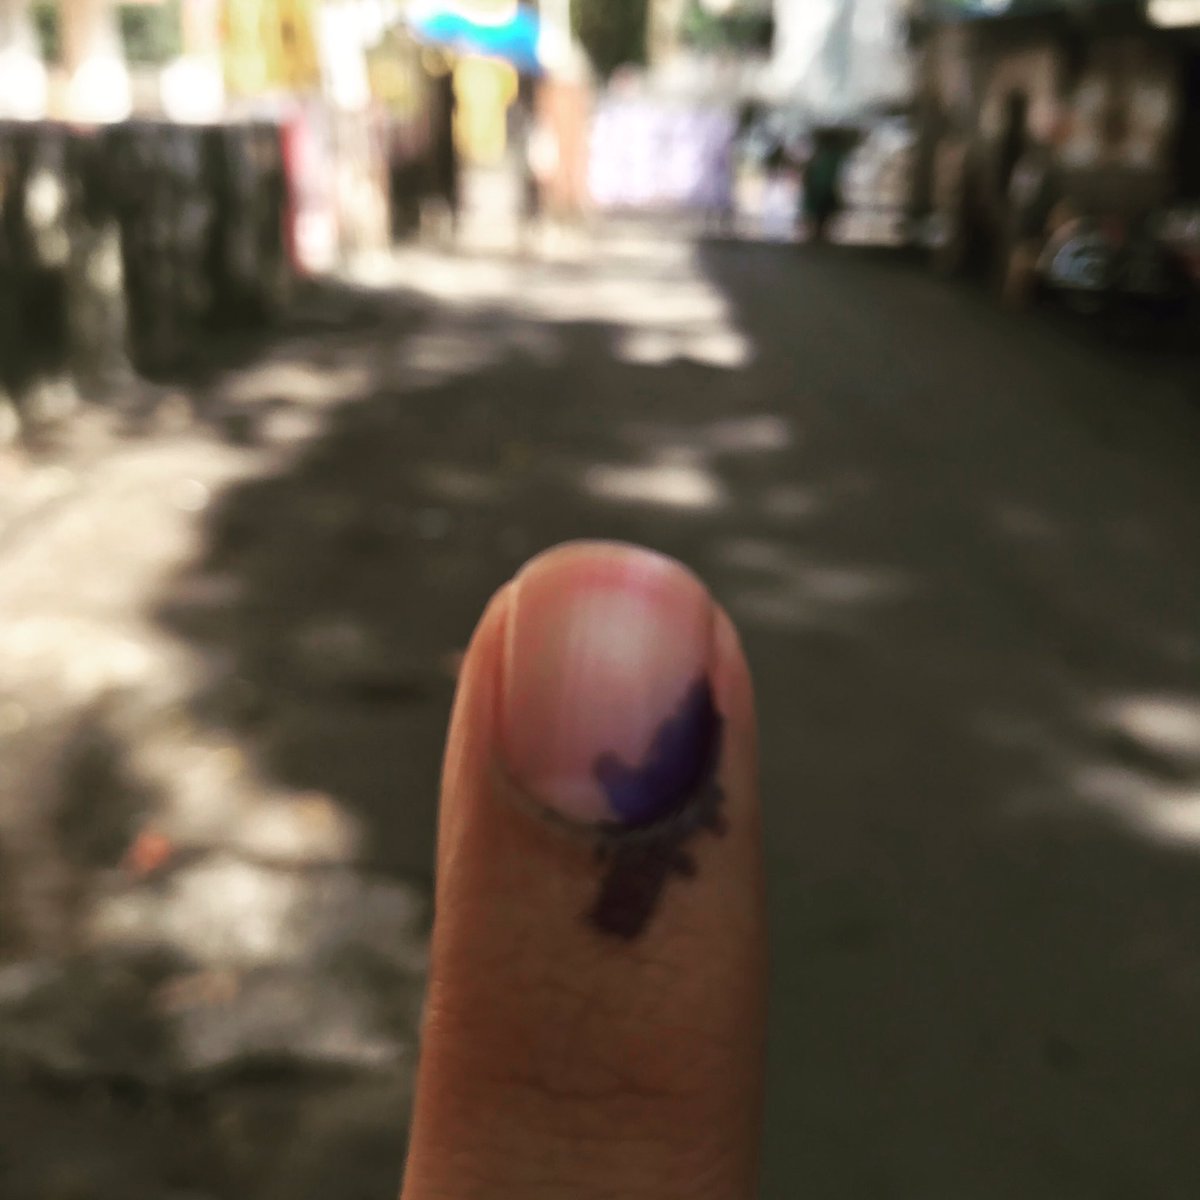 Casted my vote. Done with the first step of the duty. Next is cooperating government in Swach Bharat, abiding laws, following traffic signals (a tough one, I know), reducing plastic use. Let me be a part of the solution. Can you add a few more? #VoteKar #voting #Bettermaharashtra